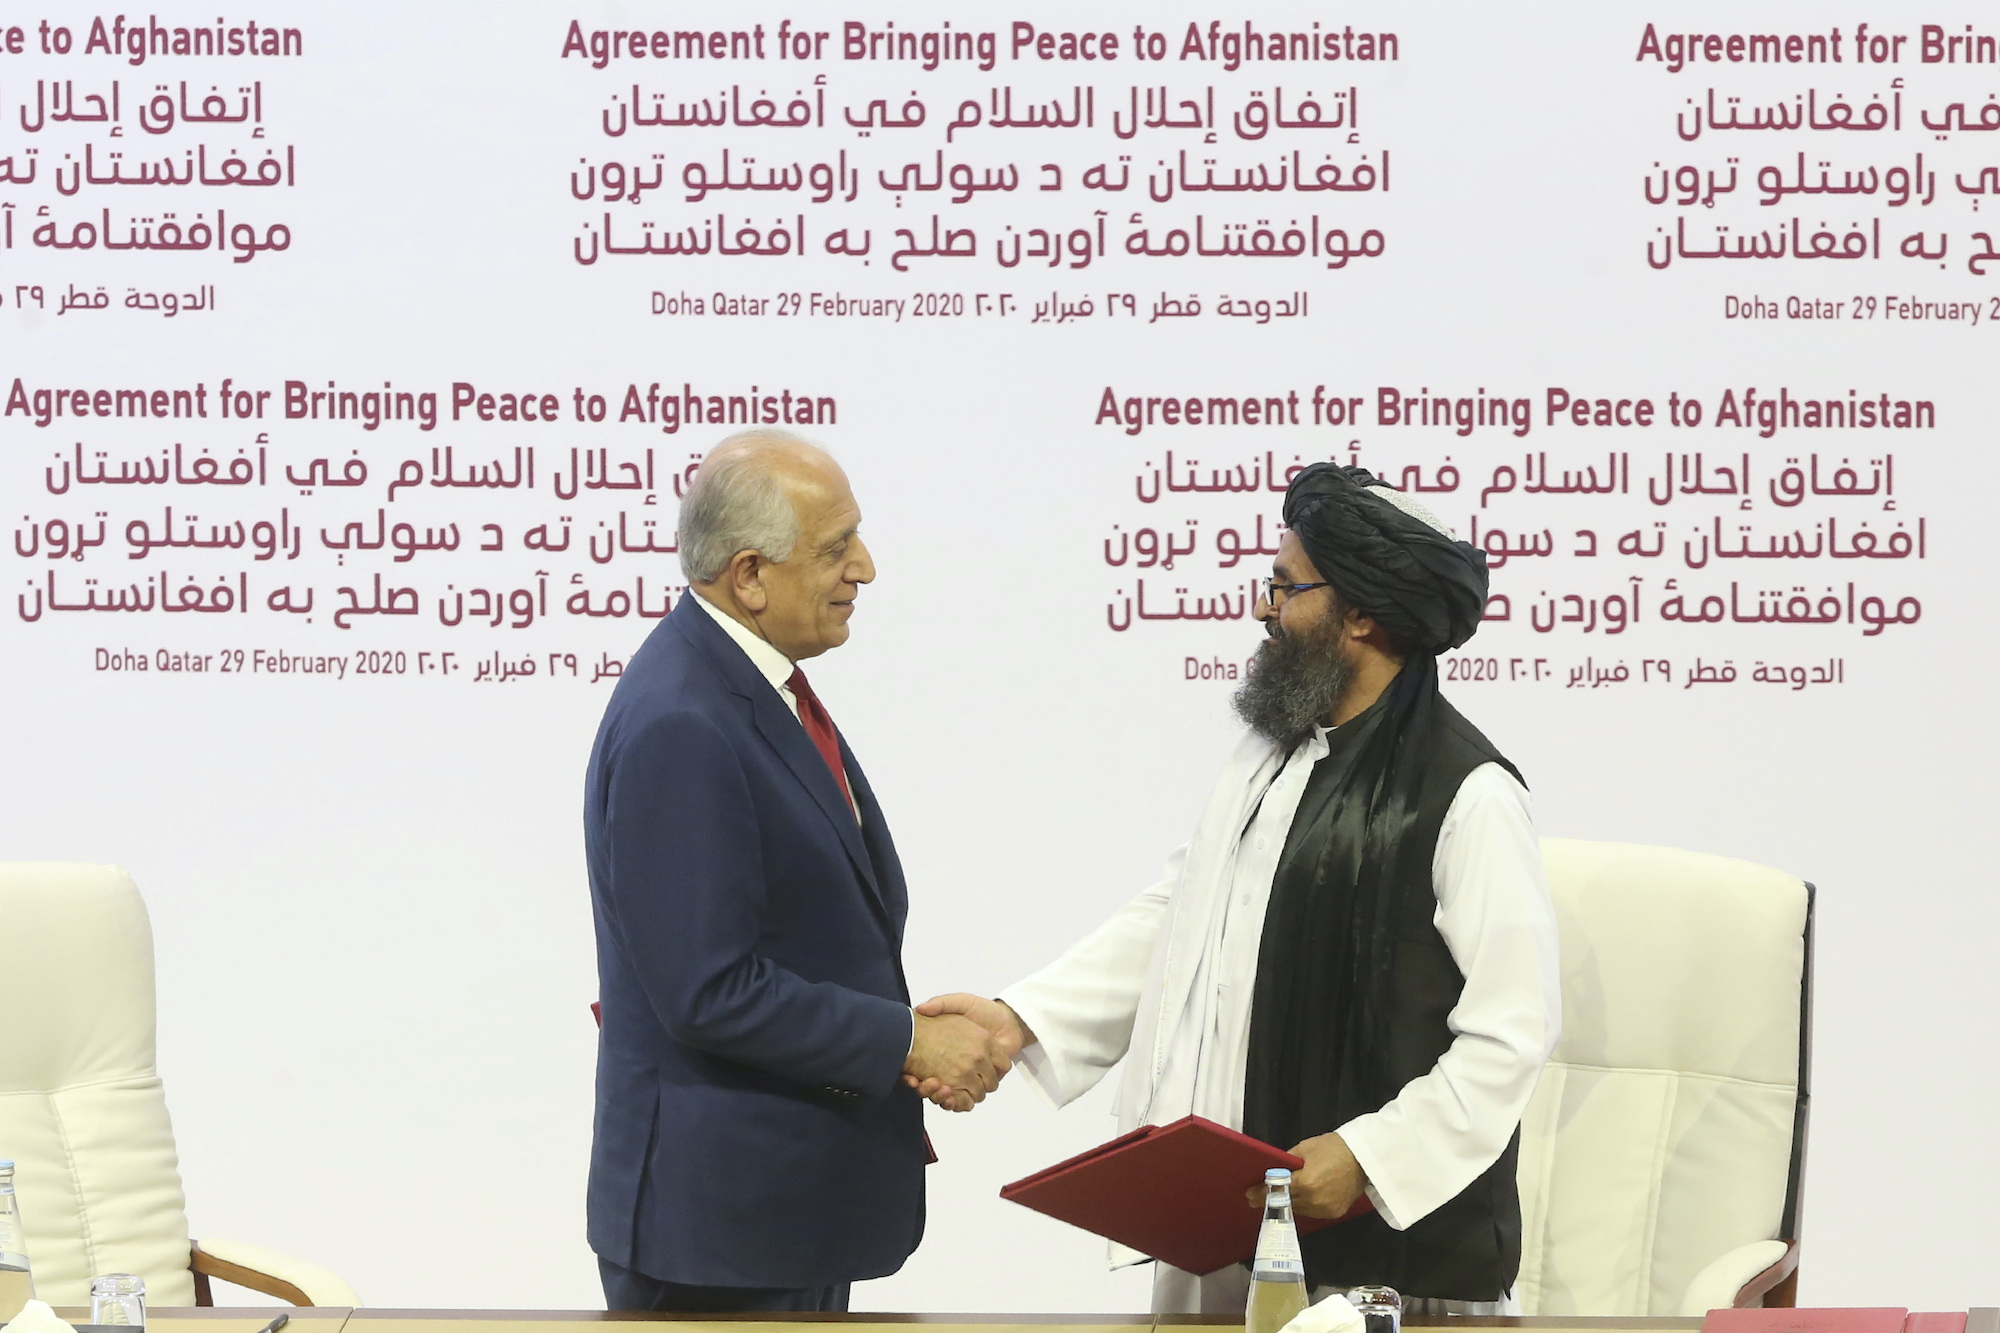 Taliban and U.S. officials shake hands over Afghan peace deal